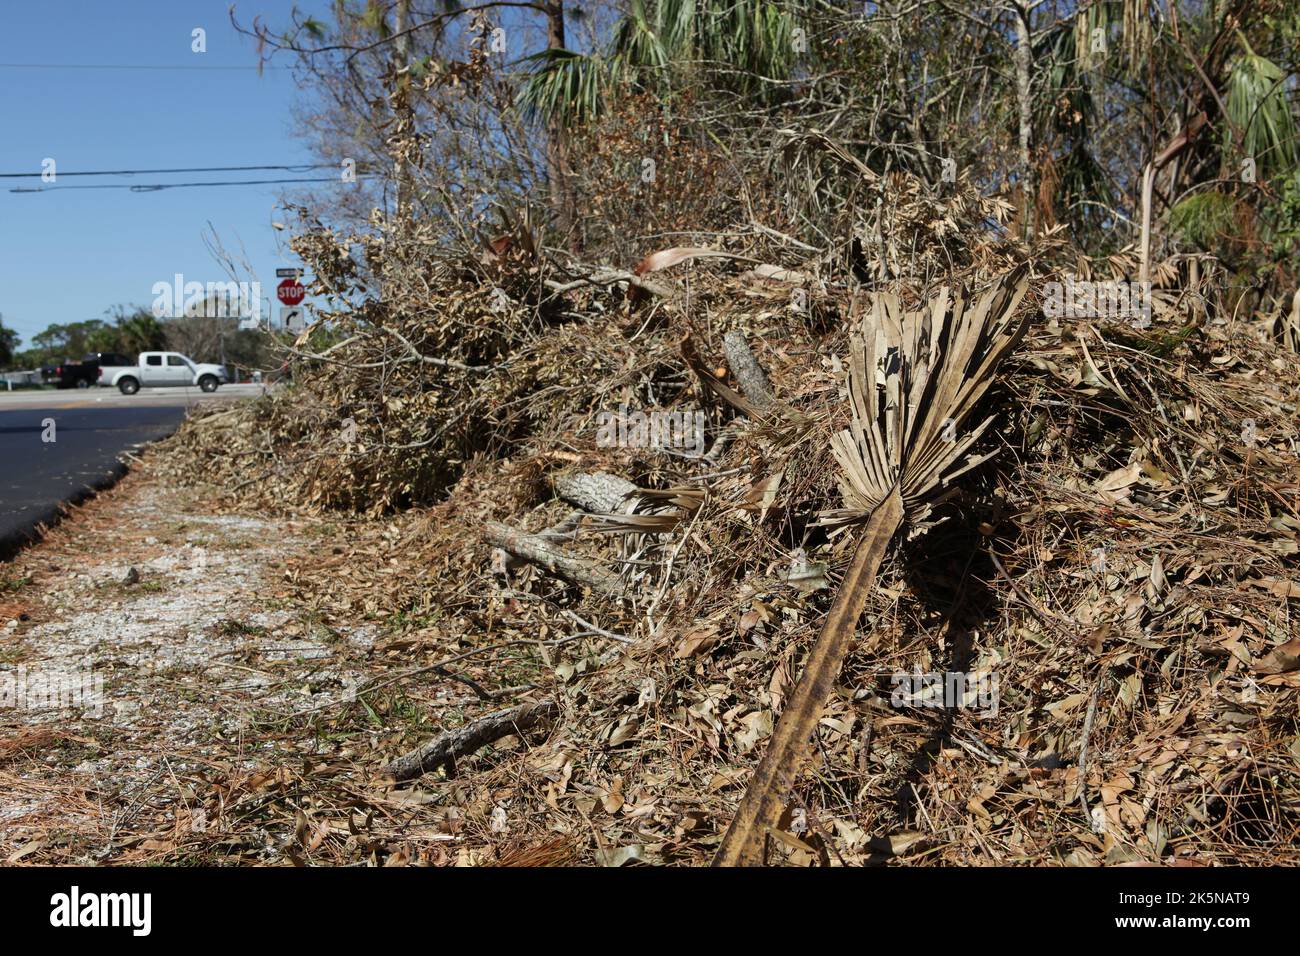 Brush, limbs and branches downed by Hurricane Ian lay along side of road awaiting pick up in N Fort Myers, Florida, Oct 8, 2022, © Katharine Andriotis Stock Photo